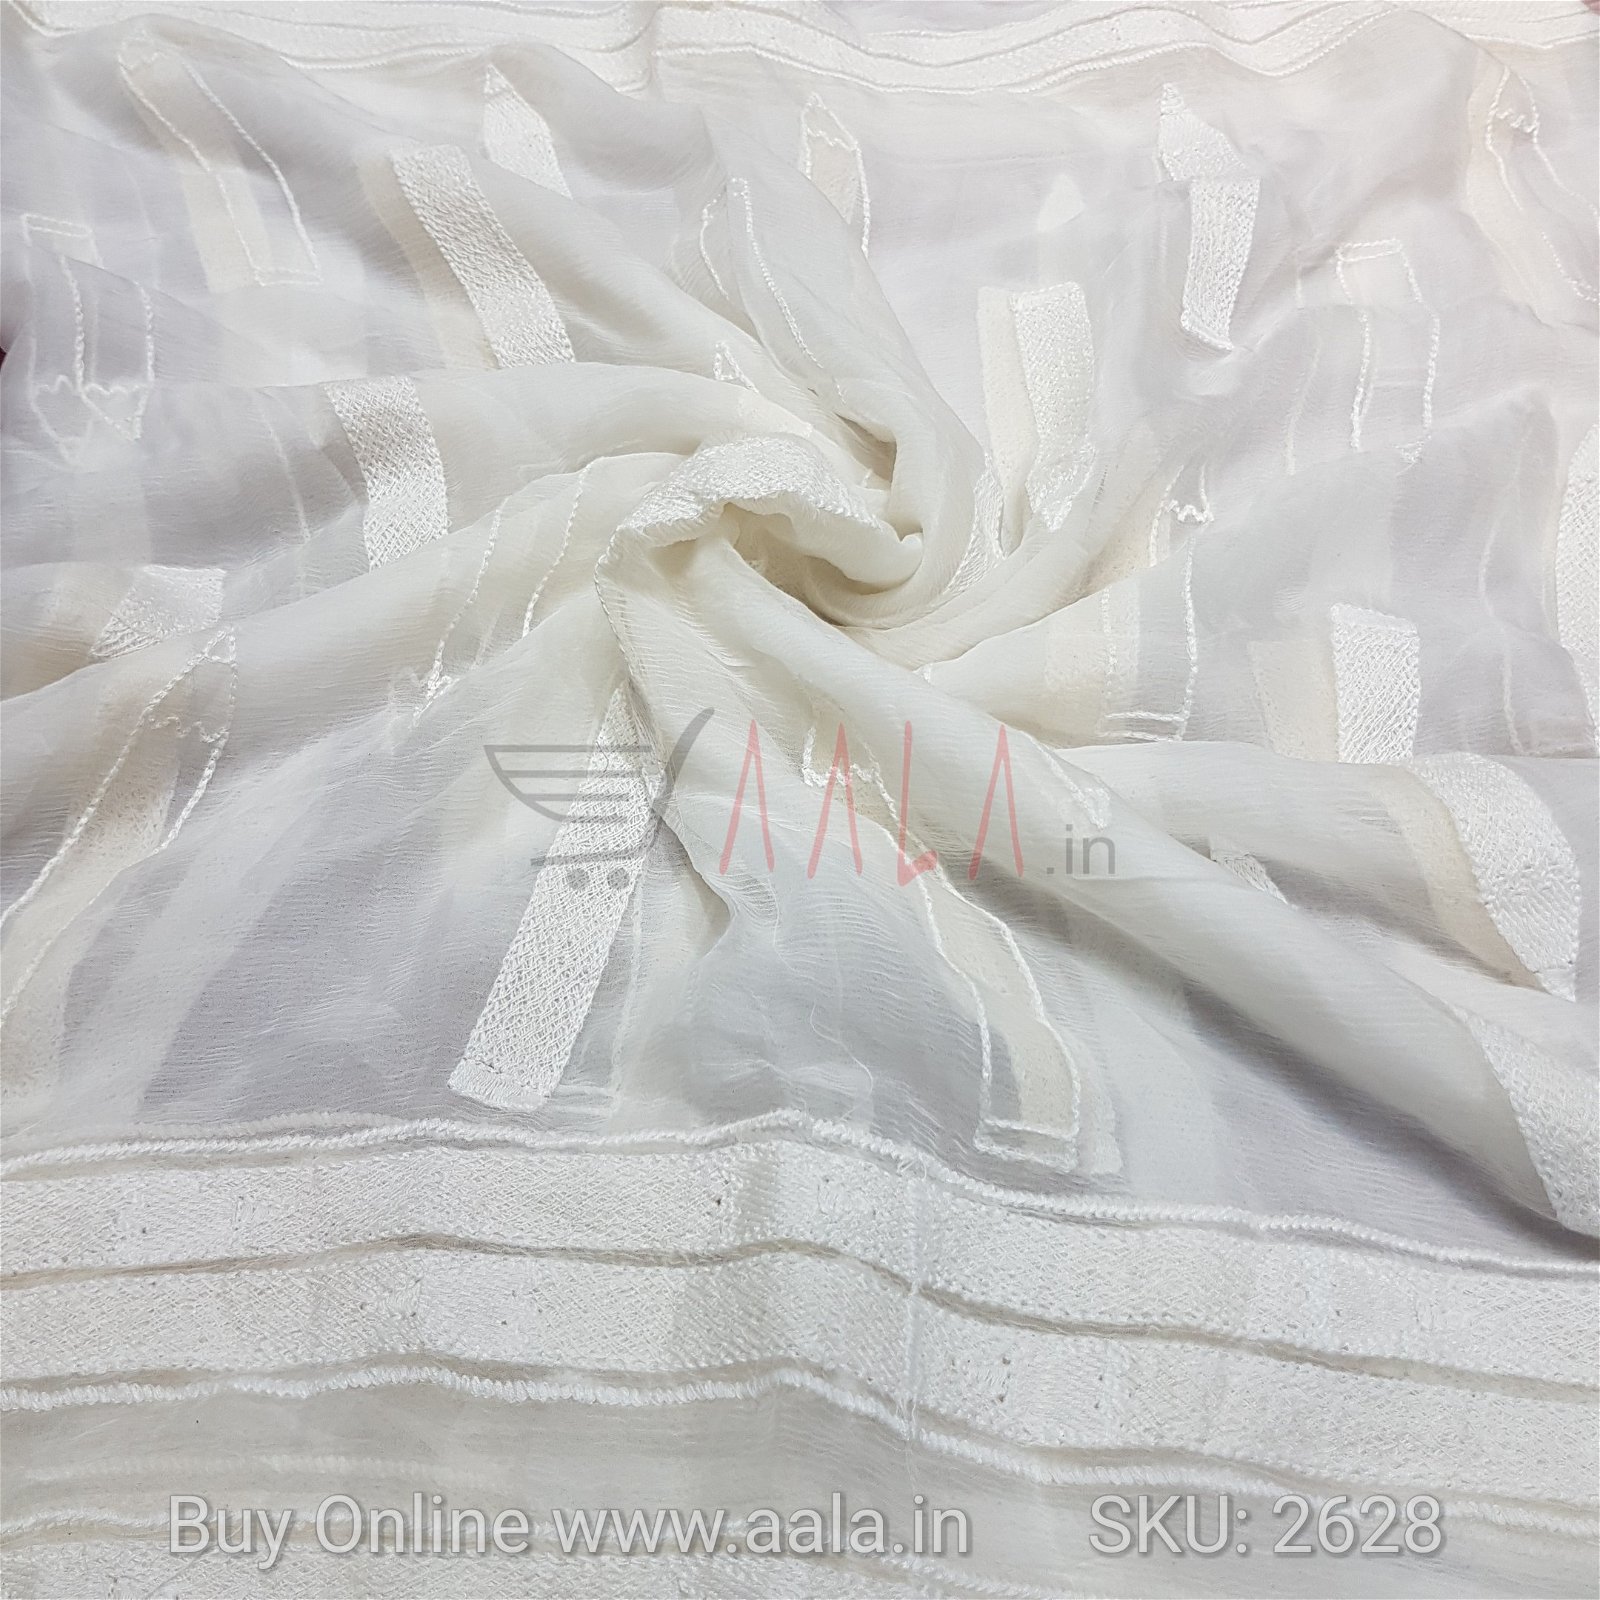 Embroidered Chiffon Viscose 42 Inches Dyeable 2.25 Metres #2628